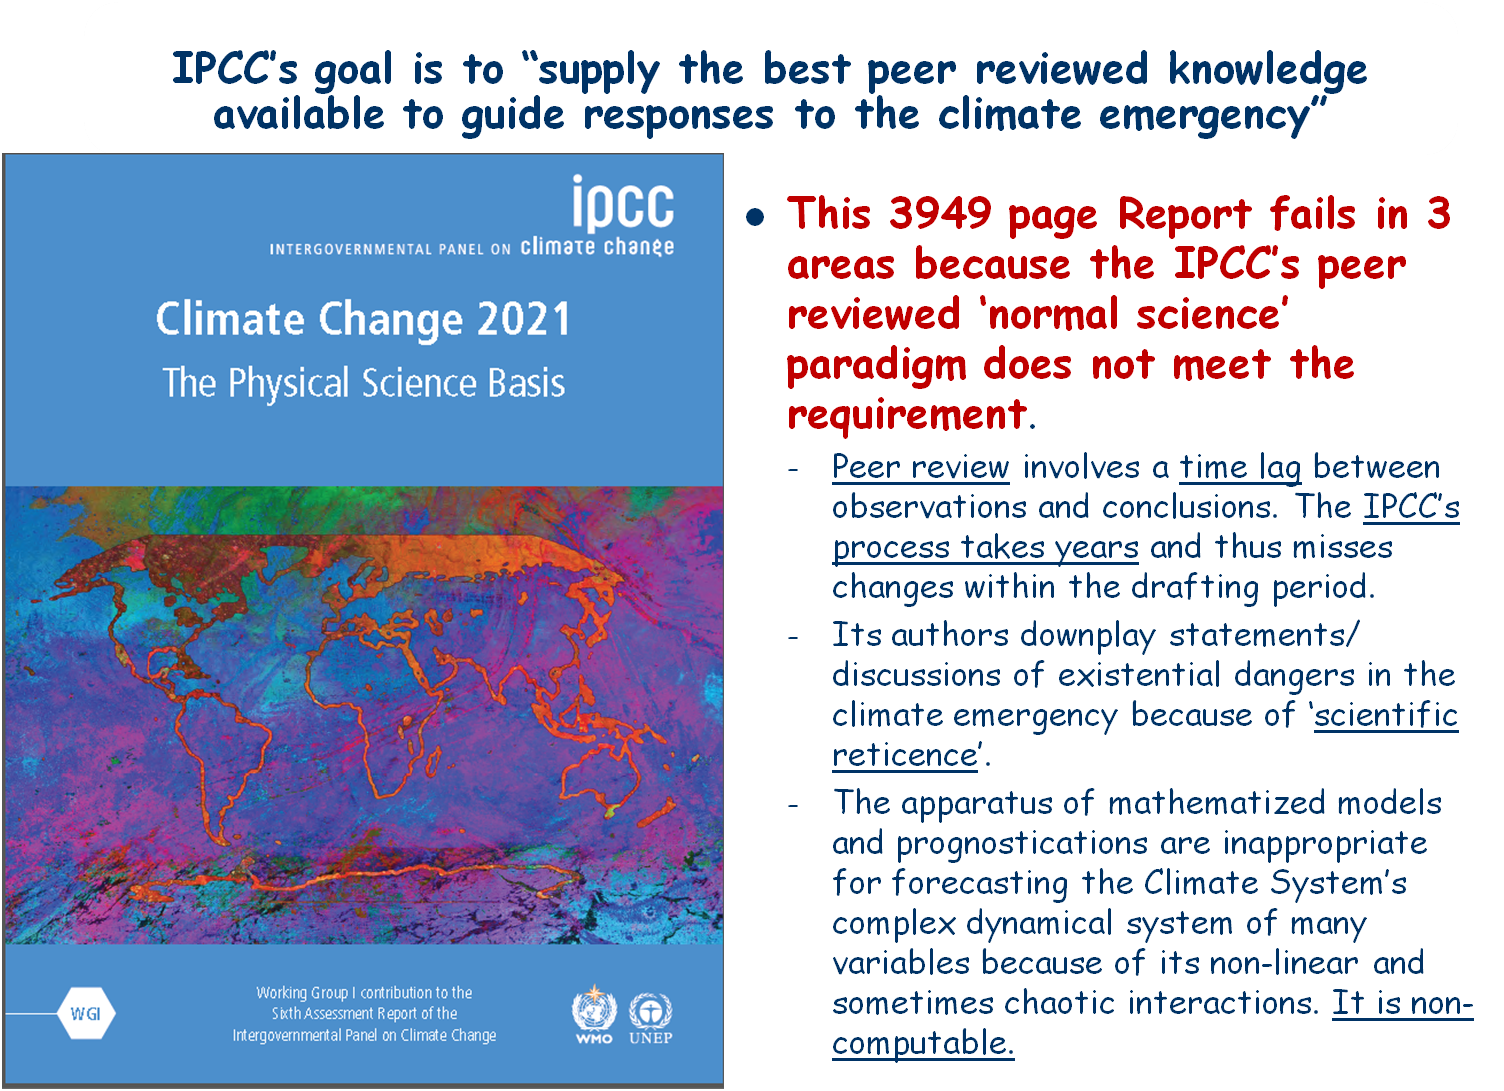 Slide 3 from my January 2022 presentation exploring issues with the reliability of the IPCC's too conservative forecasts for the future evolution of global warming and why it shouldn't be trusted.